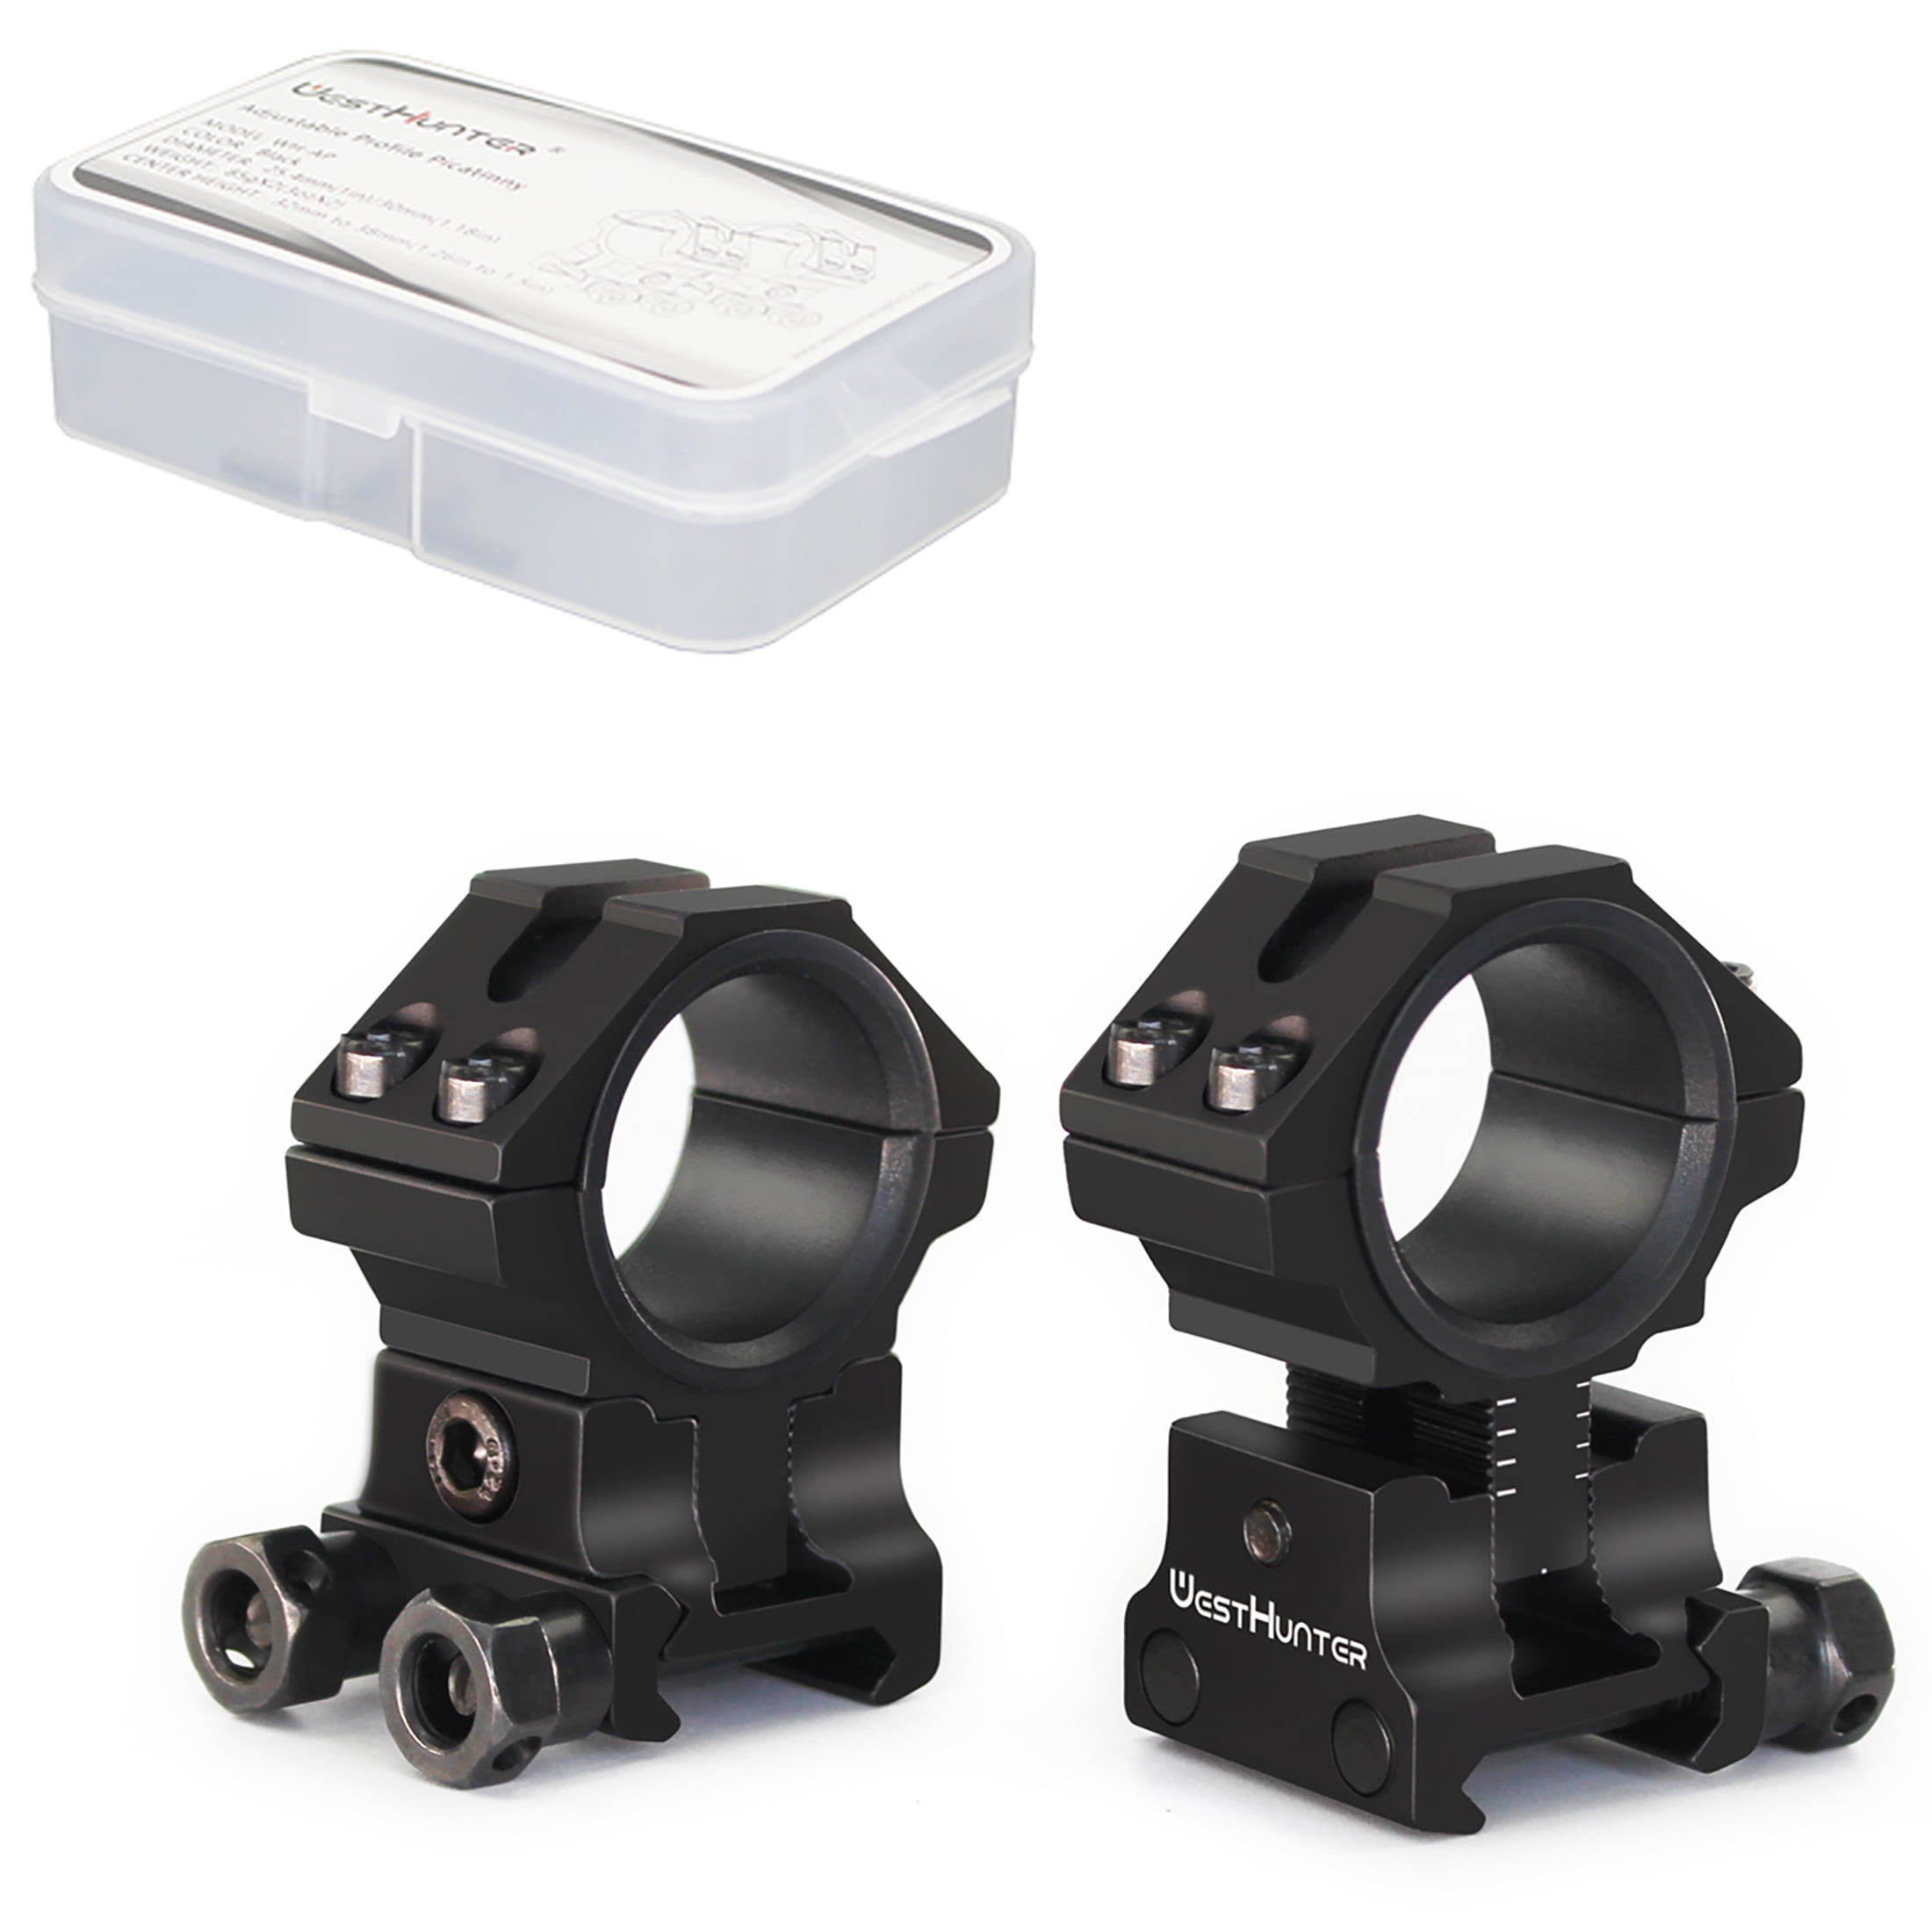 WestHunter Optics Offset Cantilever Picatinny Scope Mount 1/30mm Medium Profile One Piece Scope Dual Rings with Bubble Level 